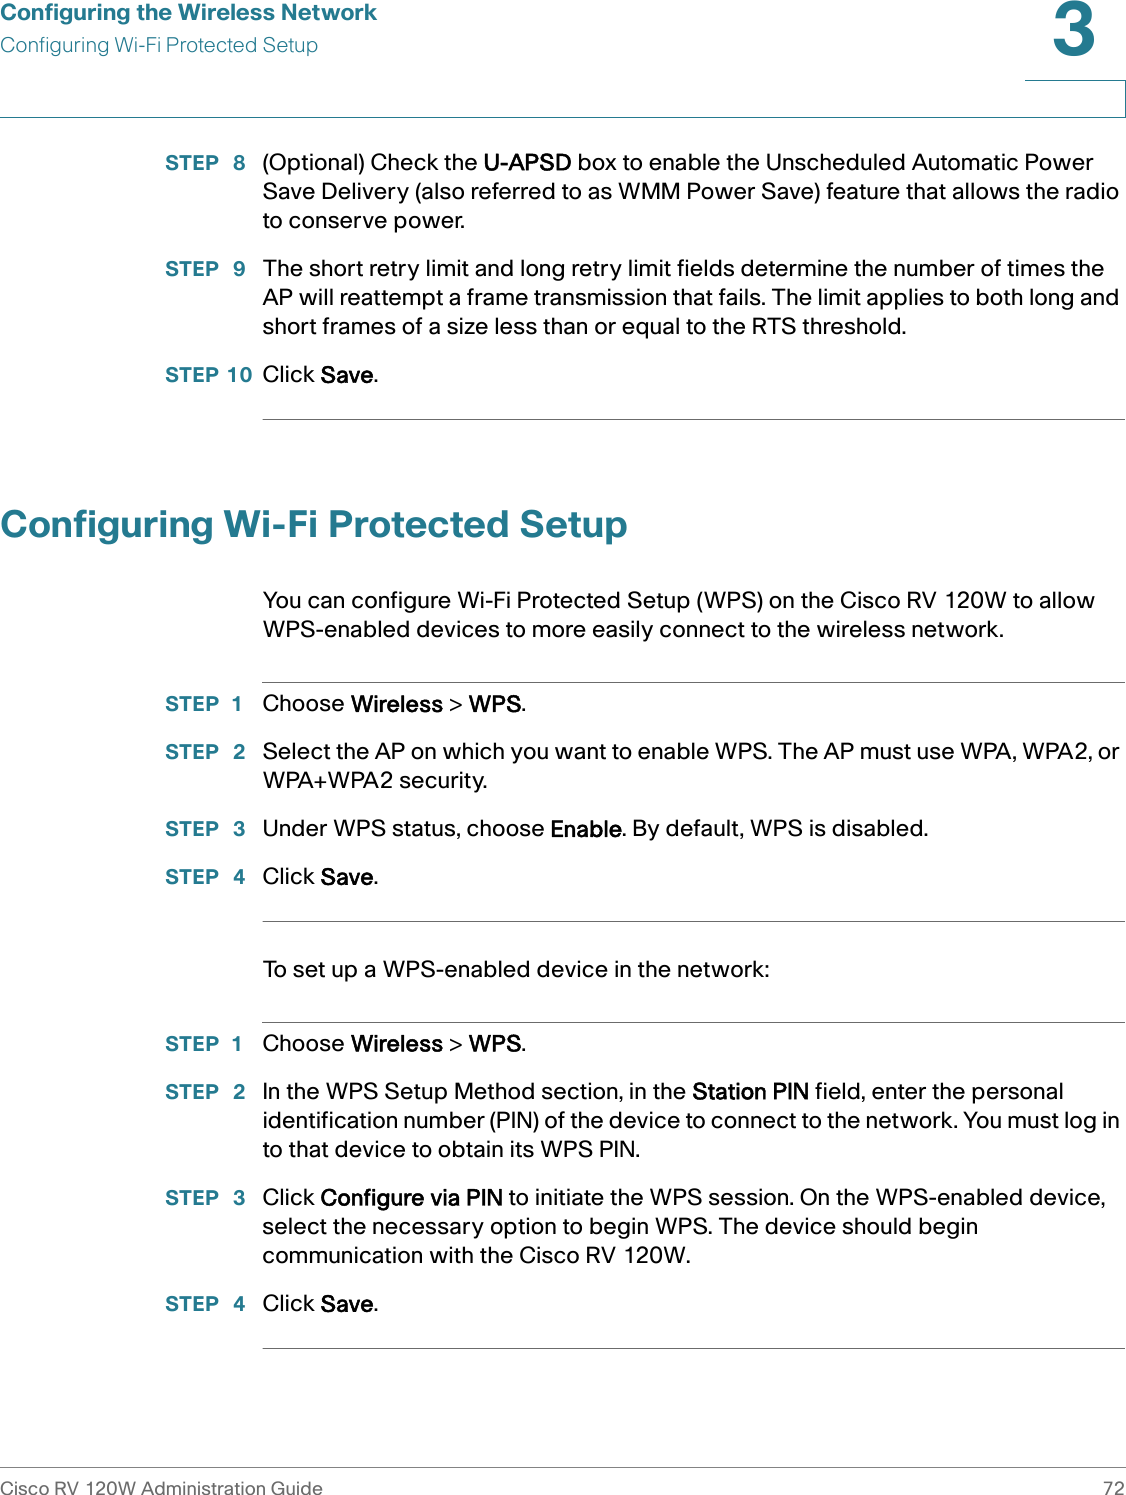 Configuring the Wireless NetworkConfiguring Wi-Fi Protected SetupCisco RV 120W Administration Guide 723 STEP  8 (Optional) Check the U-APSD box to enable the Unscheduled Automatic Power Save Delivery (also referred to as WMM Power Save) feature that allows the radio to conserve power.STEP  9 The short retry limit and long retry limit fields determine the number of times the AP will reattempt a frame transmission that fails. The limit applies to both long and short frames of a size less than or equal to the RTS threshold.STEP 10 Click Save.Configuring Wi-Fi Protected SetupYou can configure Wi-Fi Protected Setup (WPS) on the Cisco RV 120W to allow WPS-enabled devices to more easily connect to the wireless network.STEP 1 Choose Wireless &gt; WPS.STEP  2 Select the AP on which you want to enable WPS. The AP must use WPA, WPA2, or WPA+WPA2 security.STEP  3 Under WPS status, choose Enable. By default, WPS is disabled.STEP  4 Click Save.To set up a WPS-enabled device in the network:STEP 1 Choose Wireless &gt; WPS.STEP  2 In the WPS Setup Method section, in the Station PIN field, enter the personal identification number (PIN) of the device to connect to the network. You must log in to that device to obtain its WPS PIN.STEP  3 Click Configure via PIN to initiate the WPS session. On the WPS-enabled device, select the necessary option to begin WPS. The device should begin communication with the Cisco RV 120W. STEP  4 Click Save.